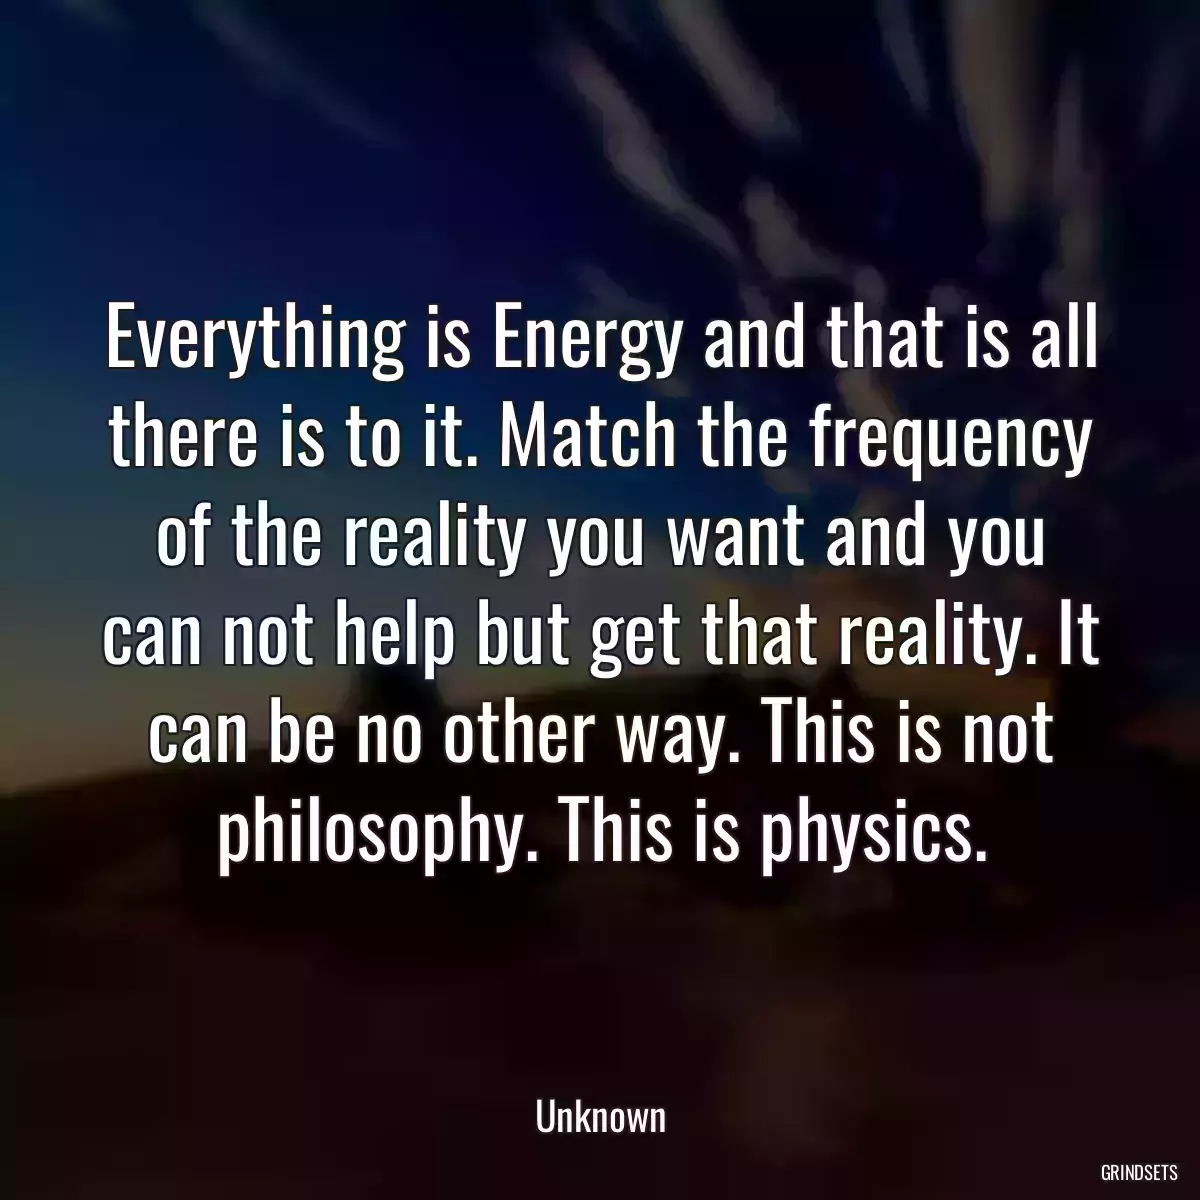 Everything is Energy and that is all there is to it. Match the frequency of the reality you want and you can not help but get that reality. It can be no other way. This is not philosophy. This is physics.